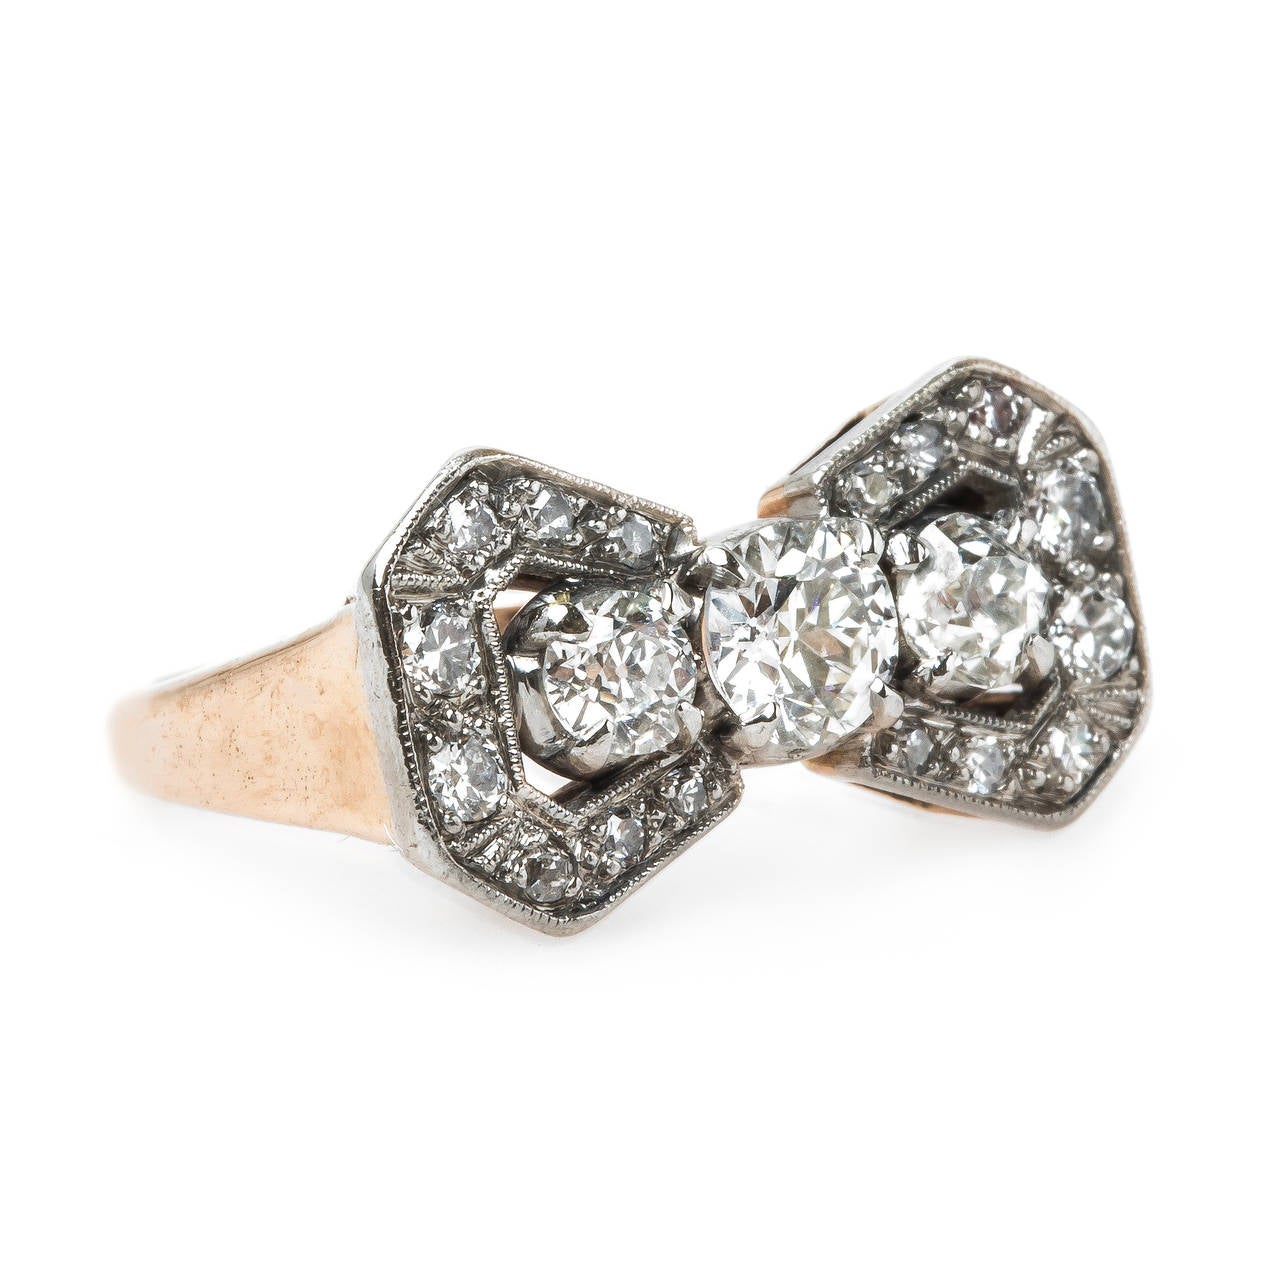 Windrose Way is complimentary authentic Retro era (circa 1940) platinum topped 14k rose gold ring designed in the shape of an exquisite bow. The ring centers a four-prong set 0.44ct EGL certified Old European Cut diamond graded E color and SI1